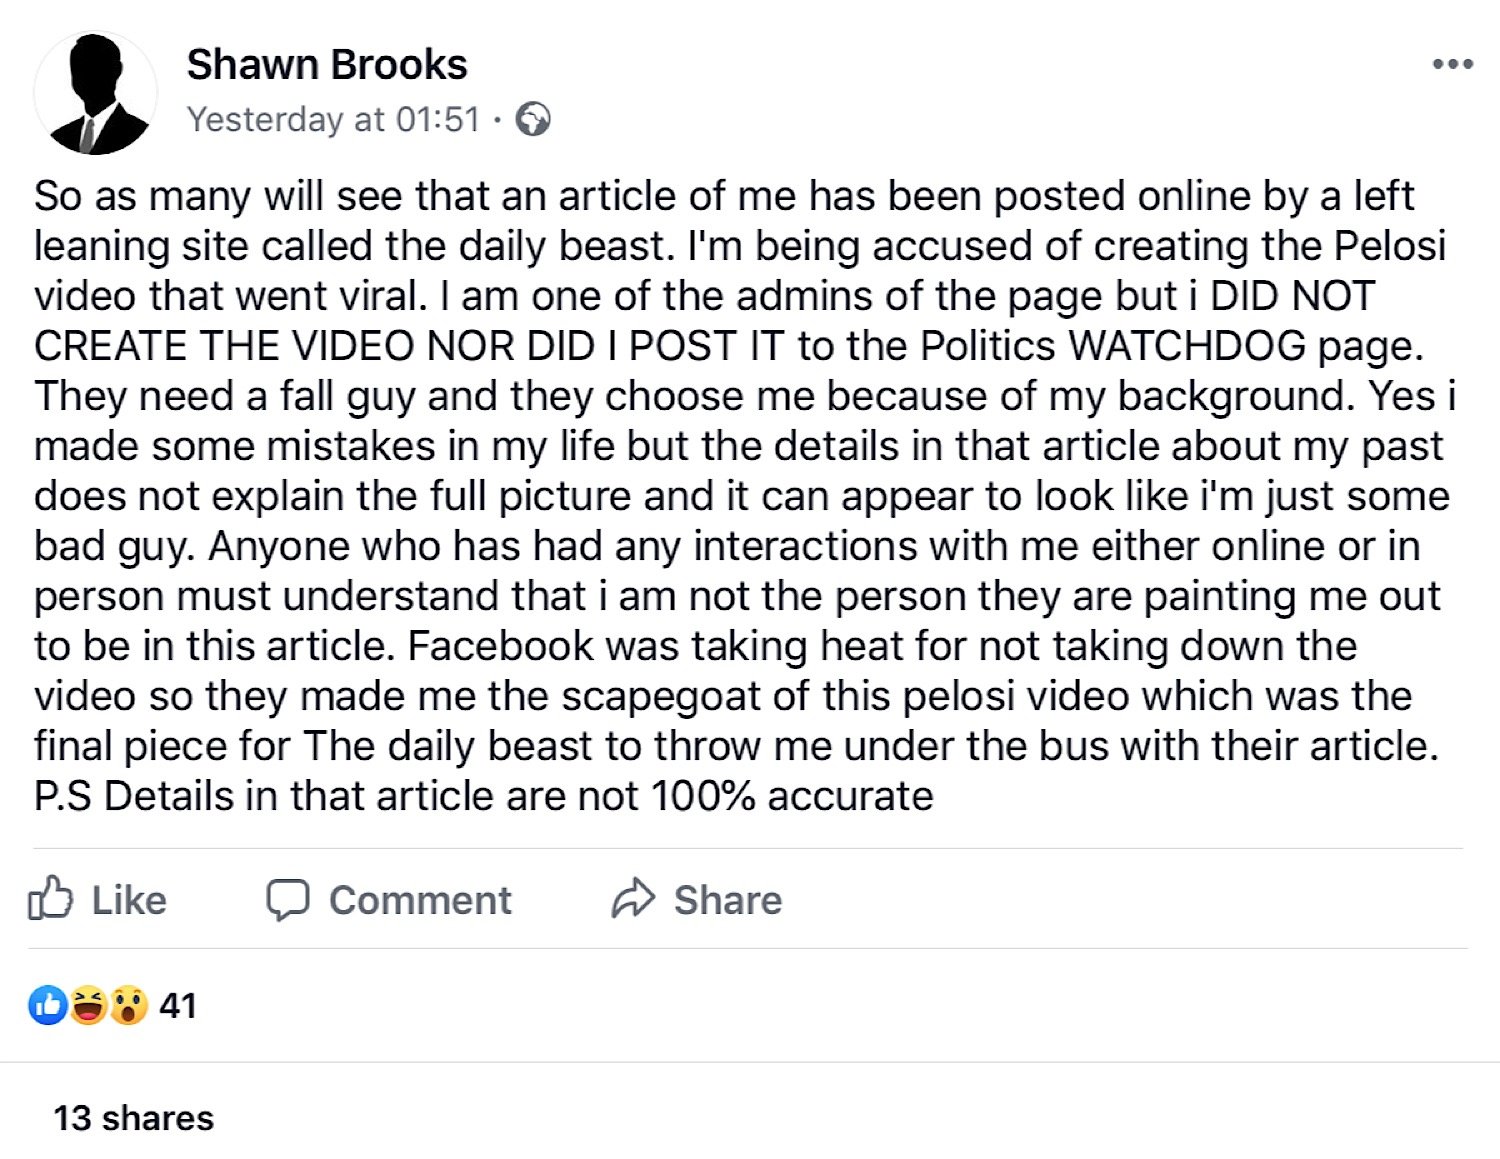 Shawn Brooks’ Facebook statement on The Daily Beast article.